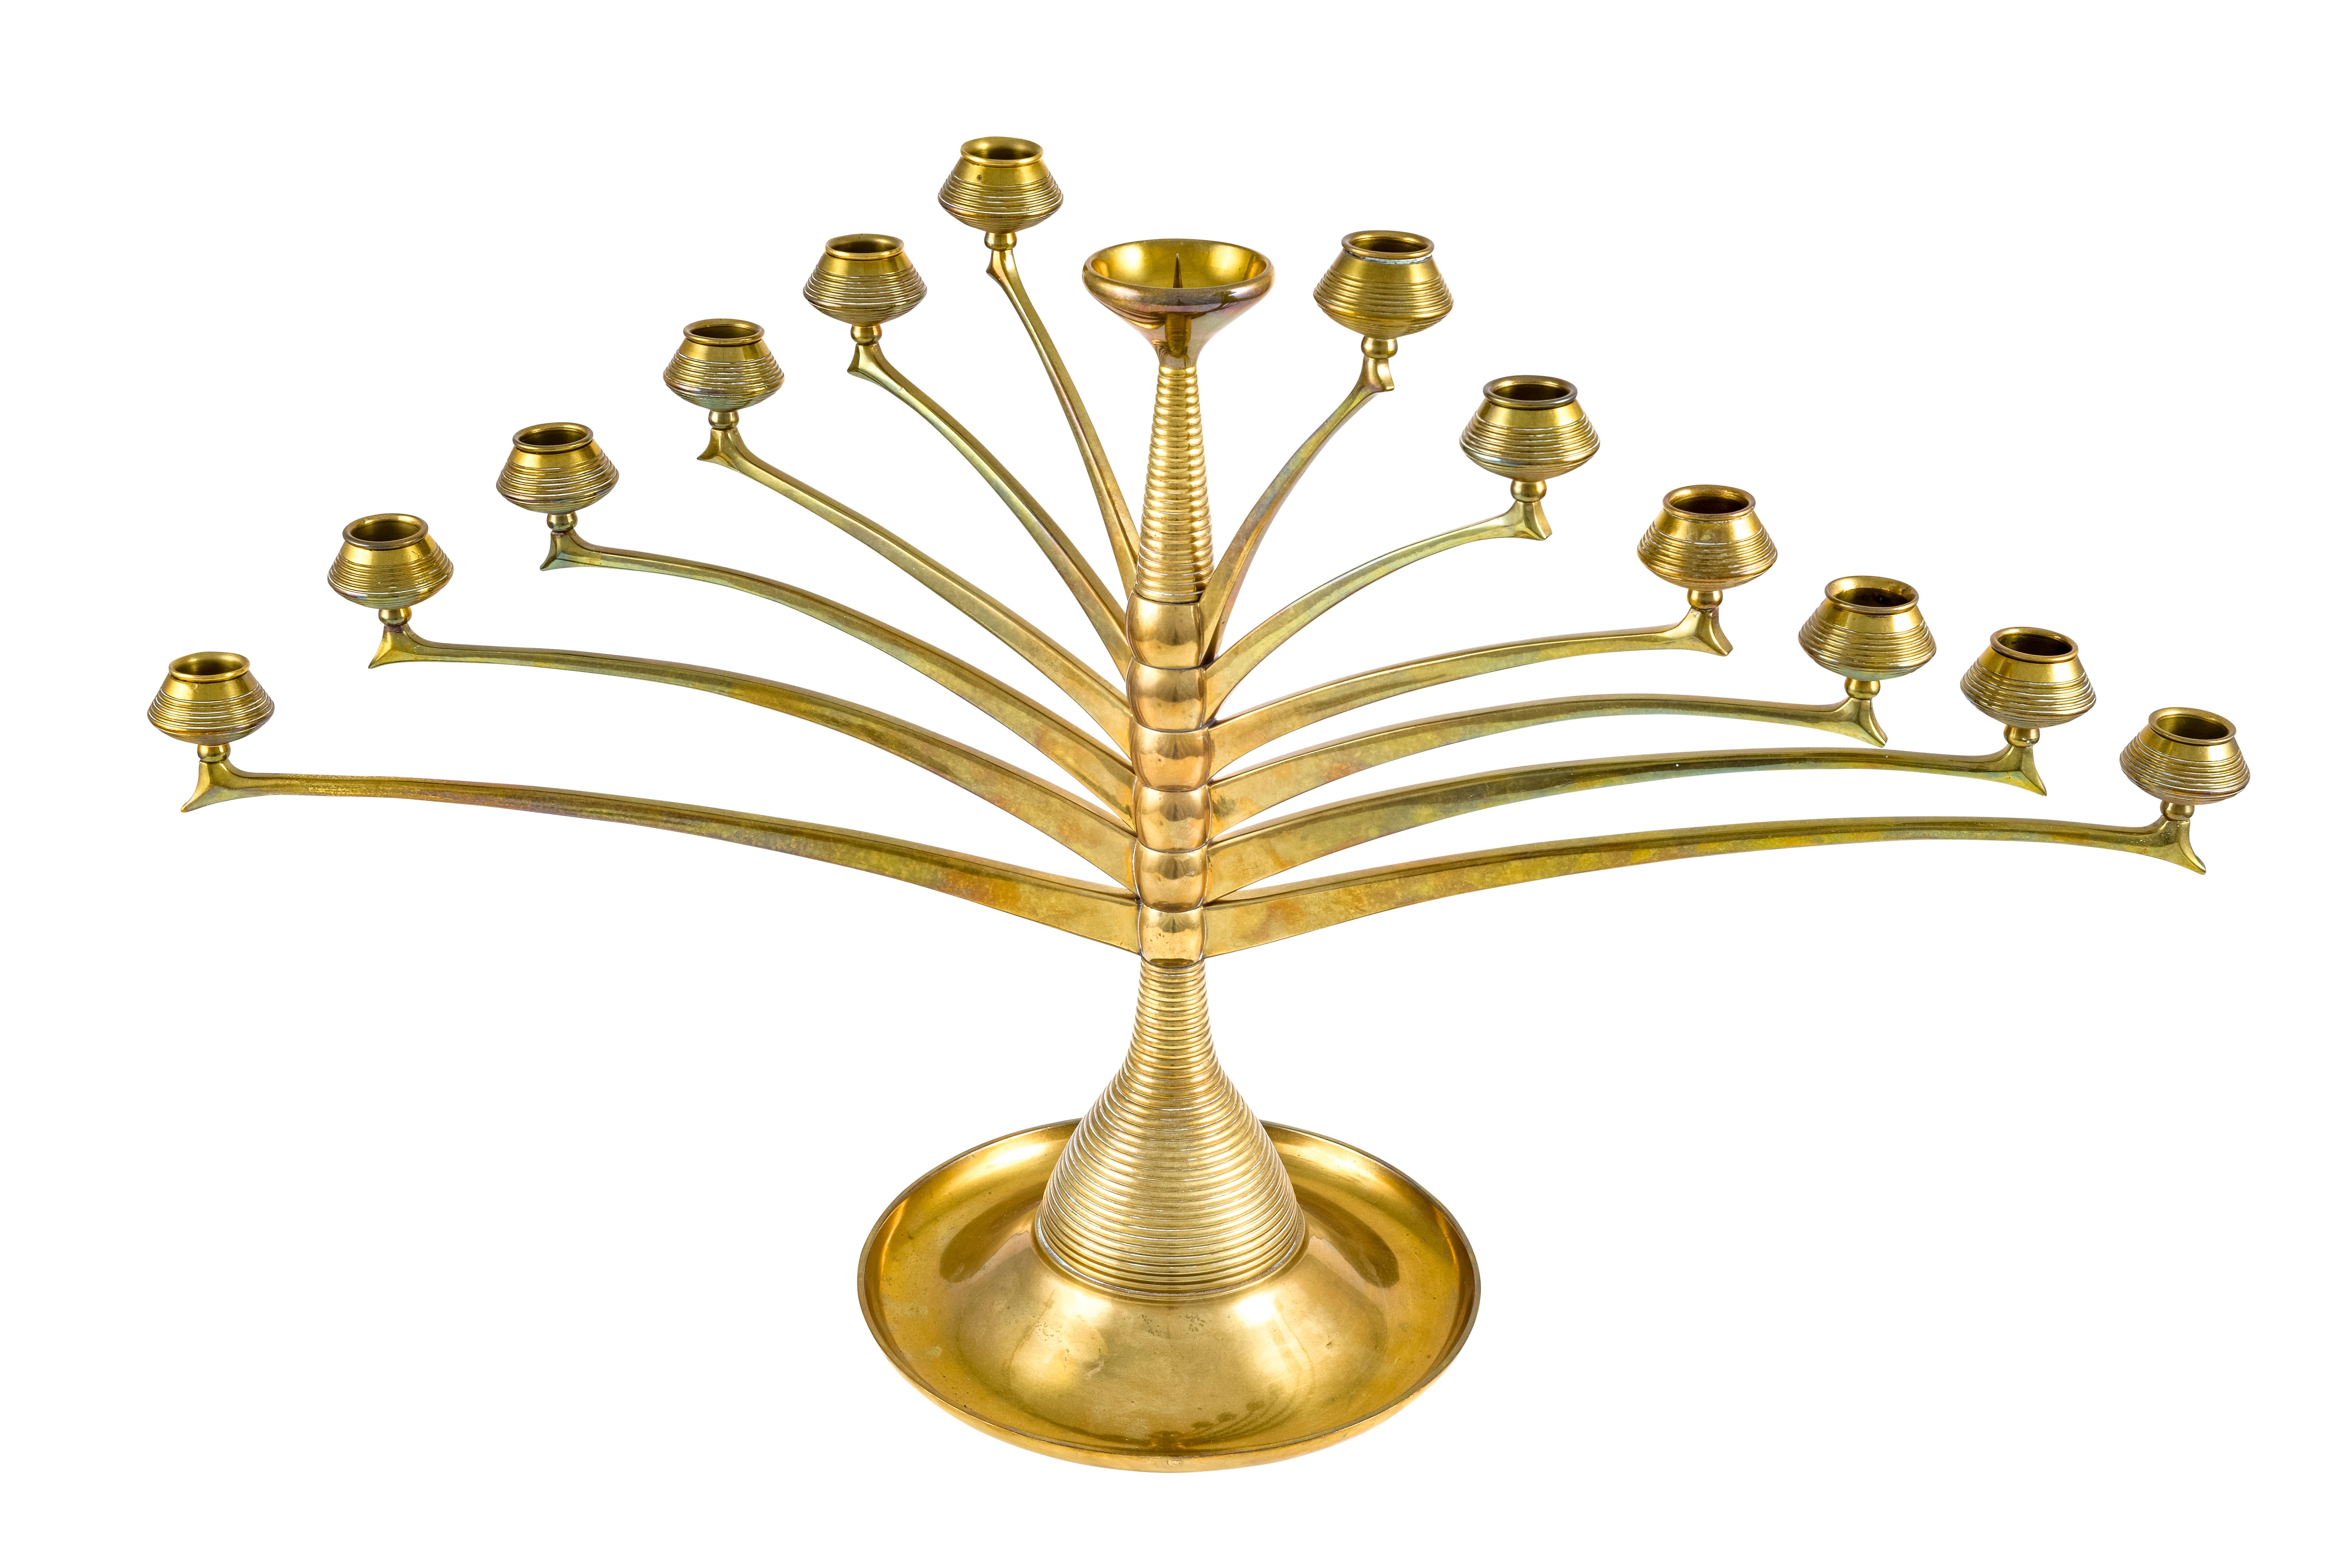 Polished brass candelabras German Jugendstil designed by Bruno Paul executed by K.M. Seifert & Co. in Dresden, circa 1901

The architect Bruno Paul designed this iconic candlestick with the model number 58 in 1901. At that time, the versatile